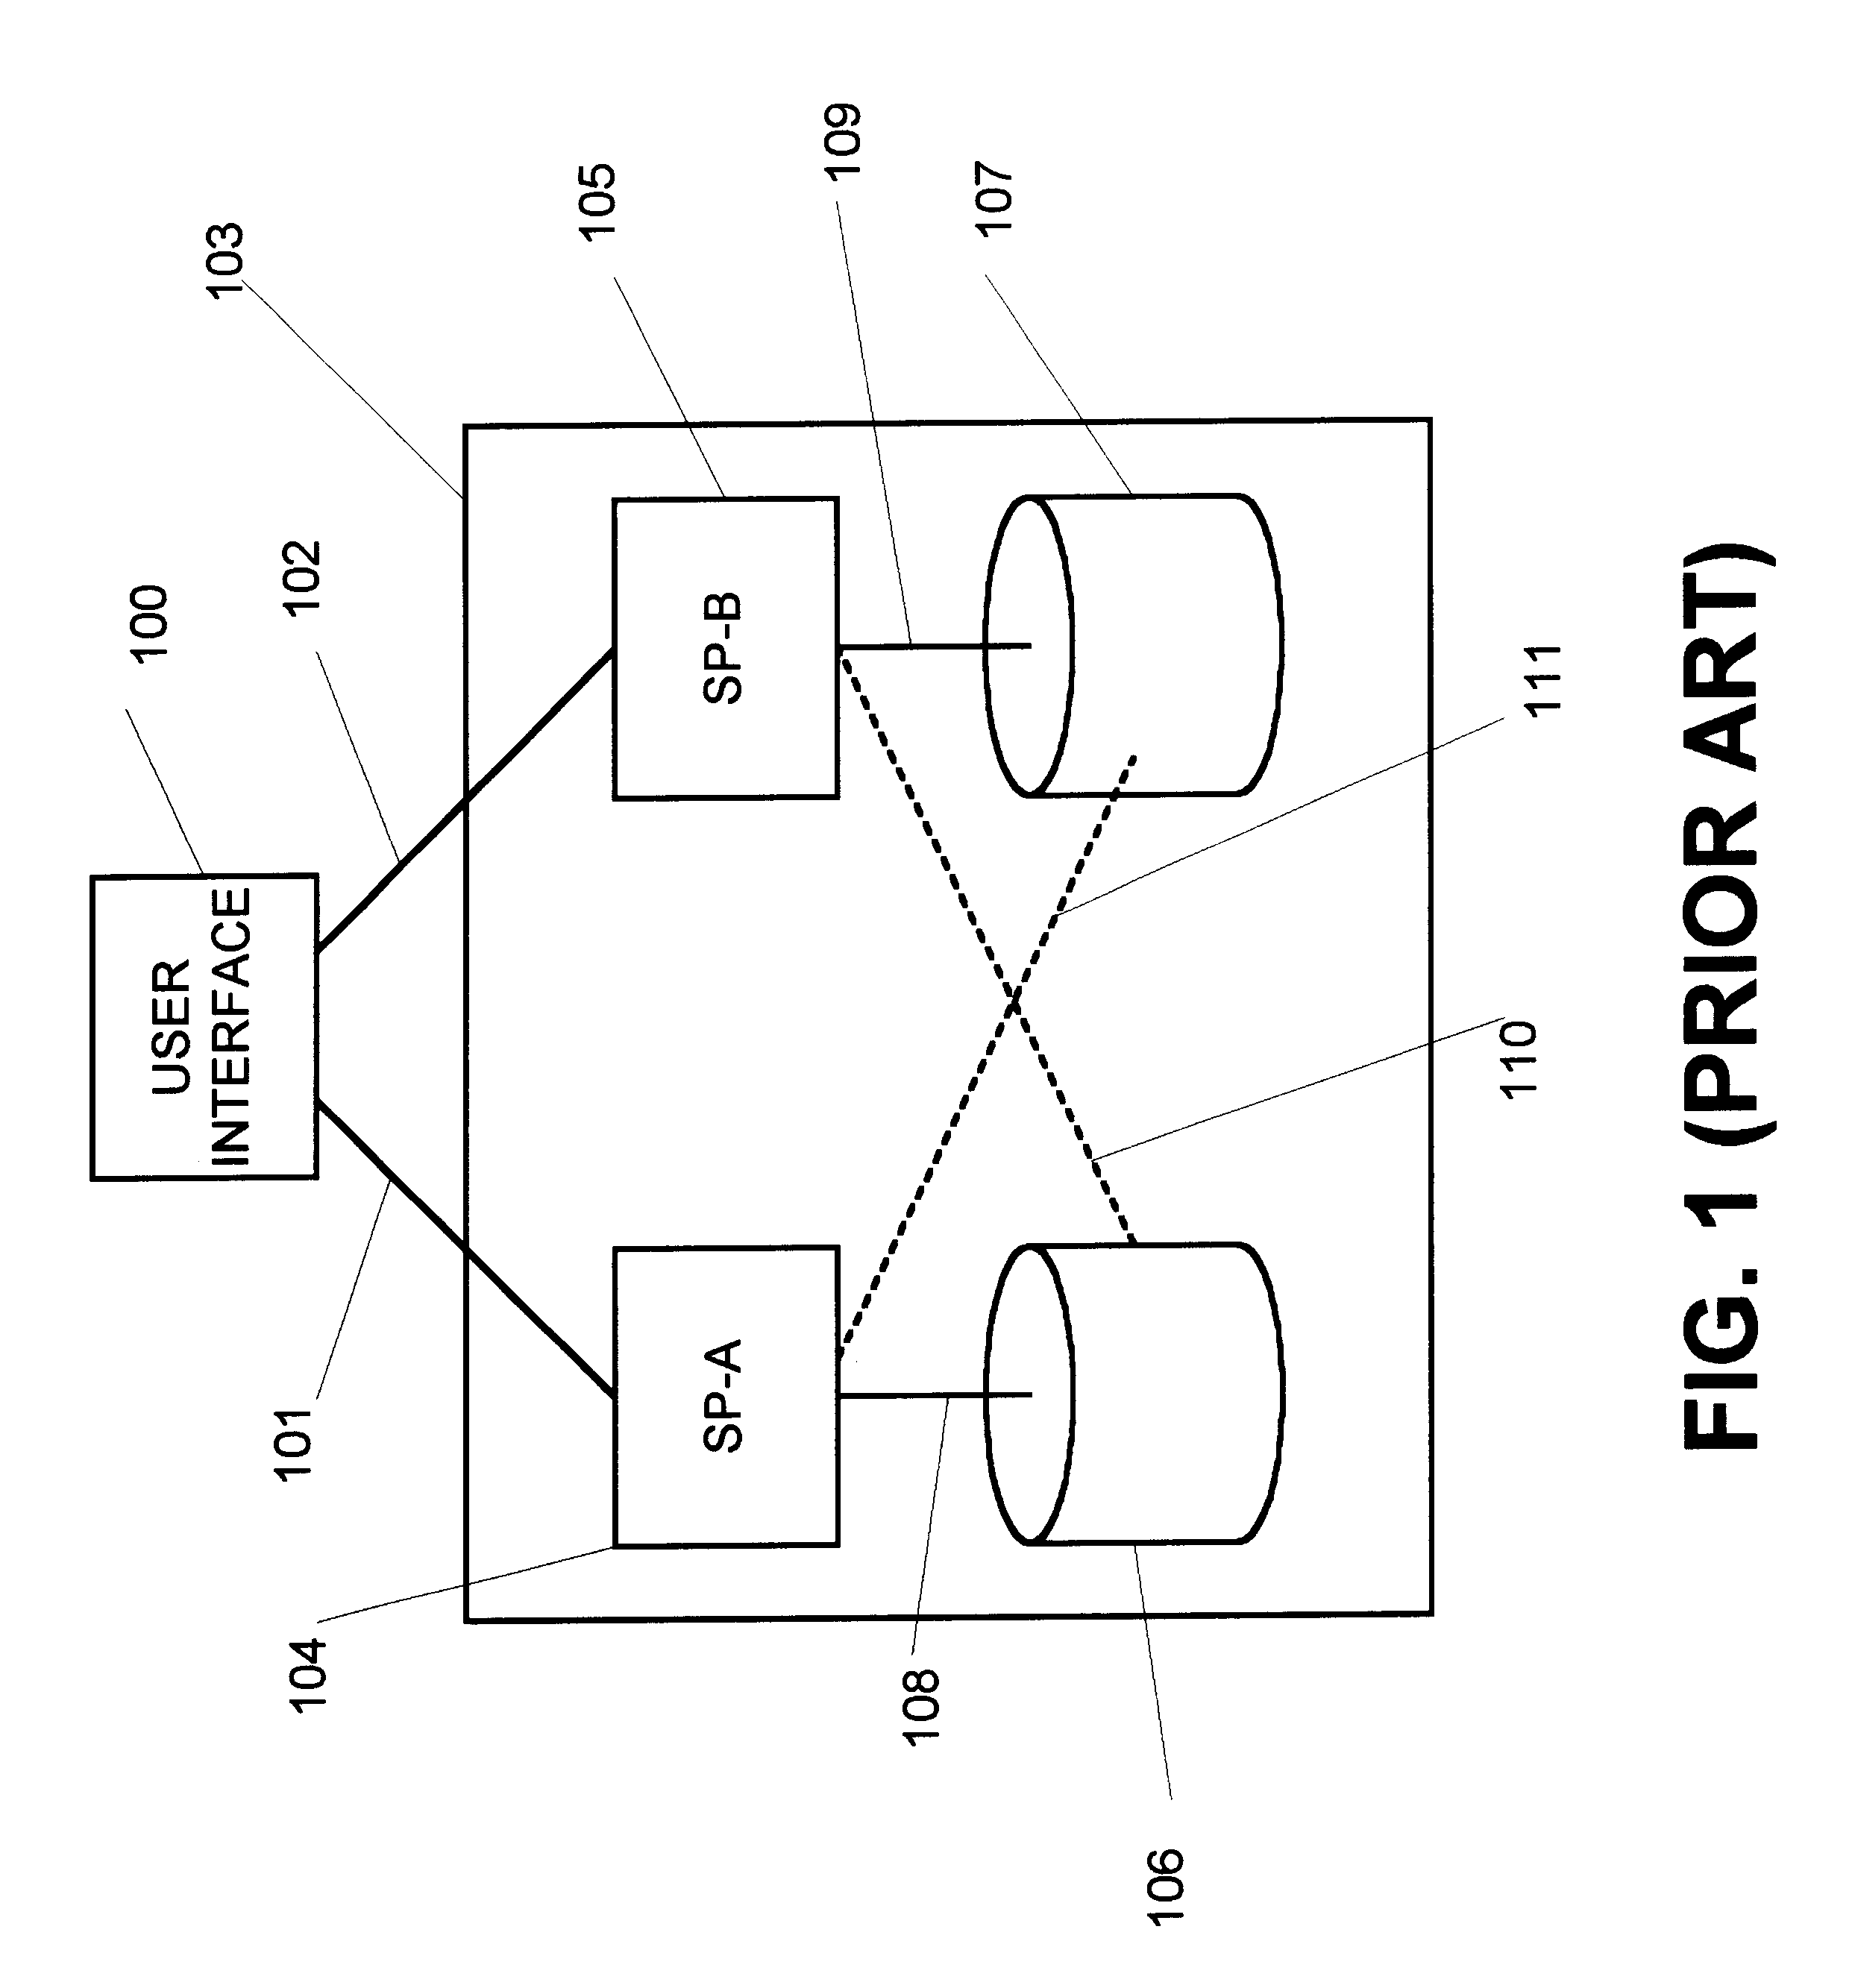 Single management point for a storage system or storage area network